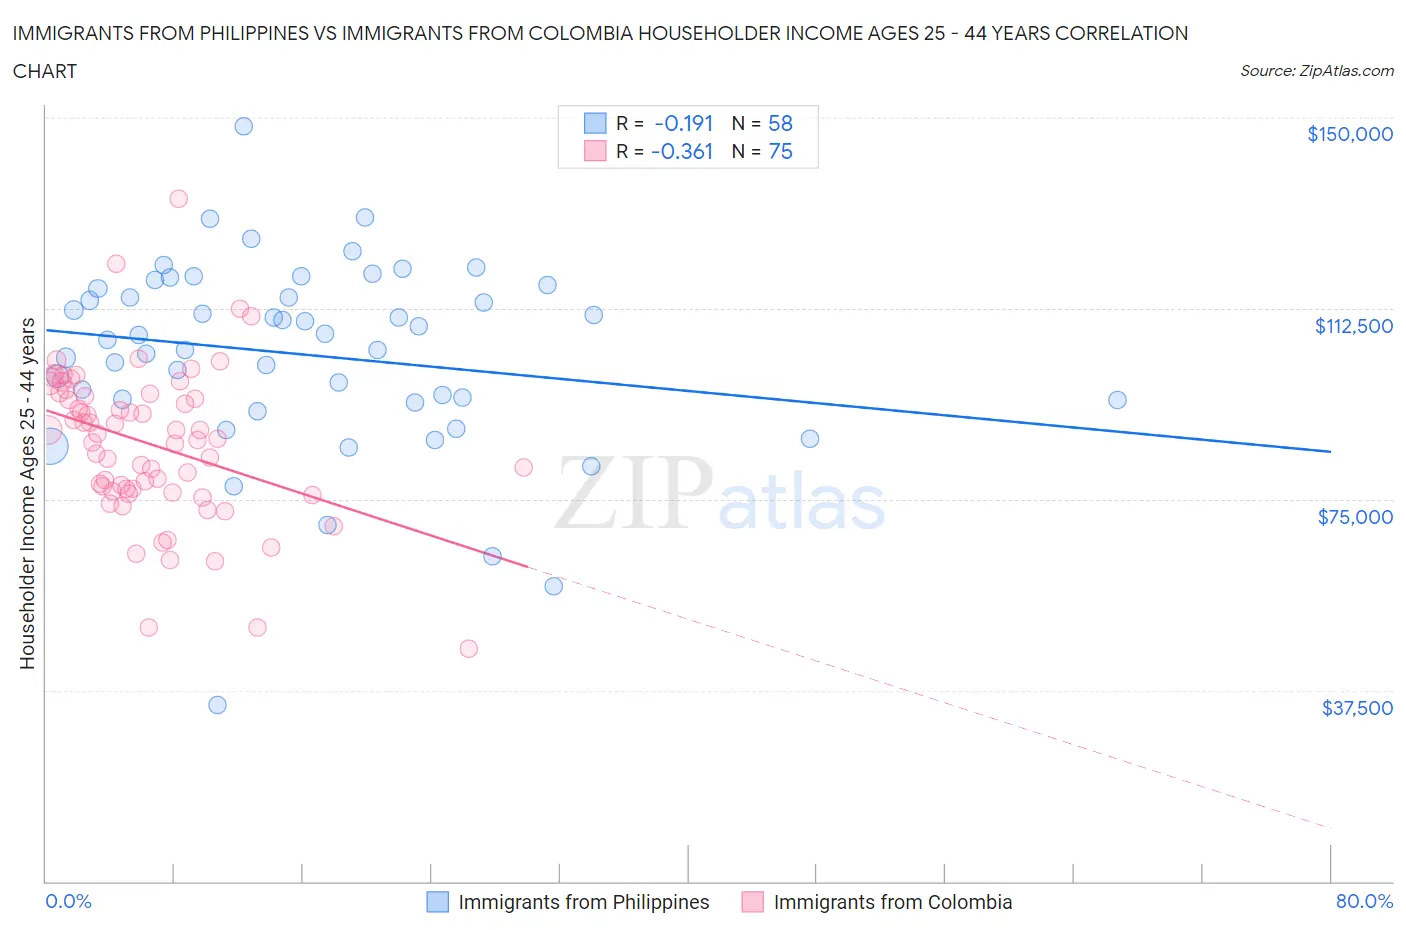 Immigrants from Philippines vs Immigrants from Colombia Householder Income Ages 25 - 44 years